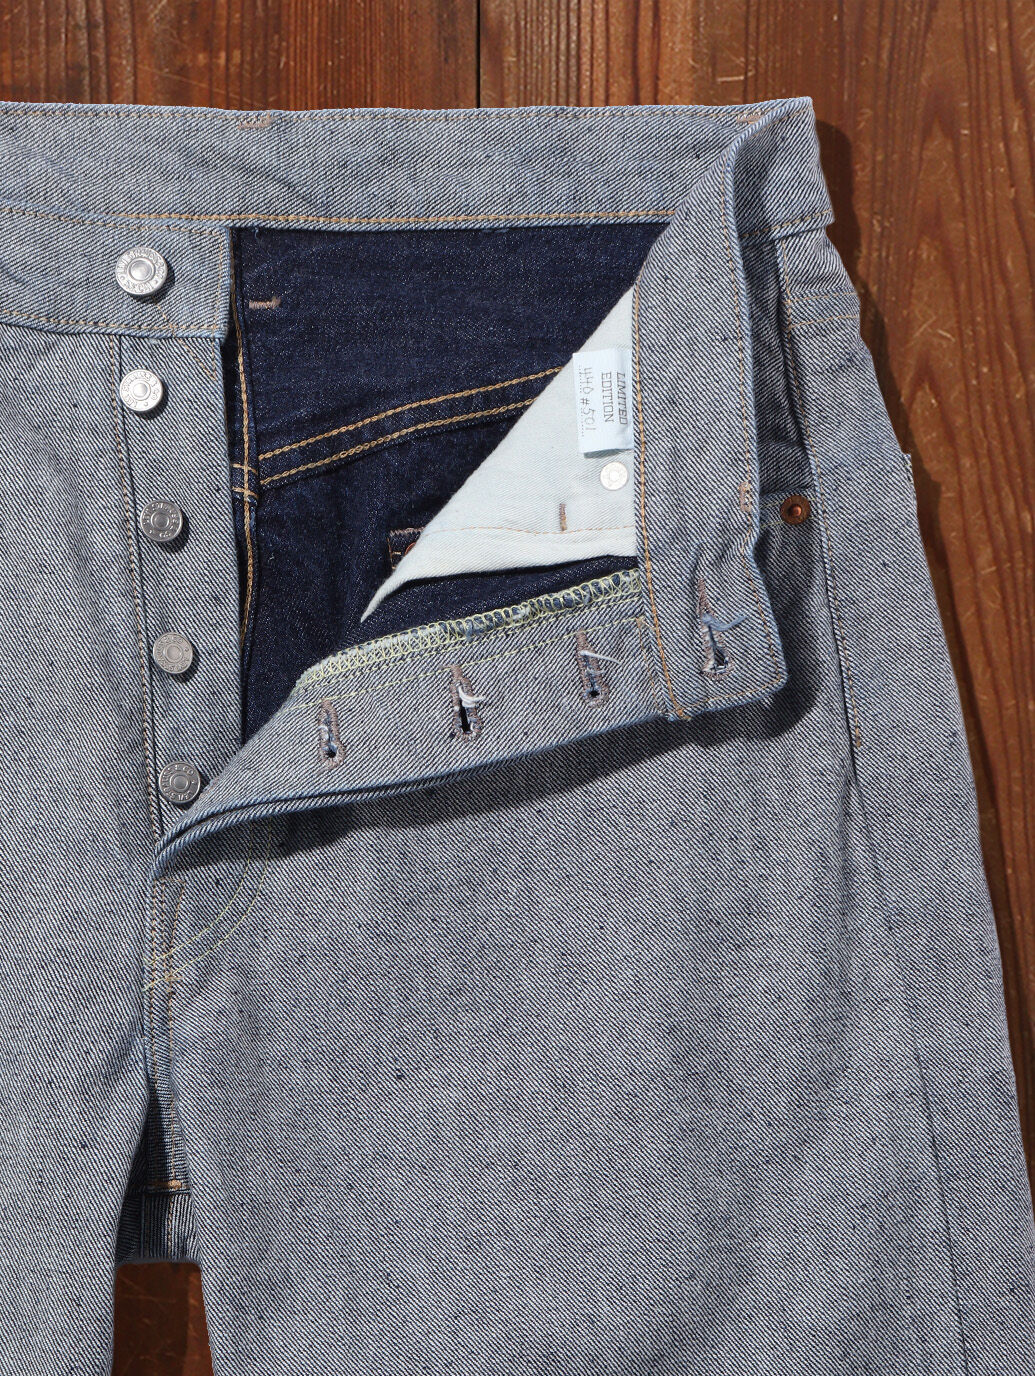 LIMITED EDITIONLEVI'S® VINTAGE CLOTHING INSIDE OUT 501